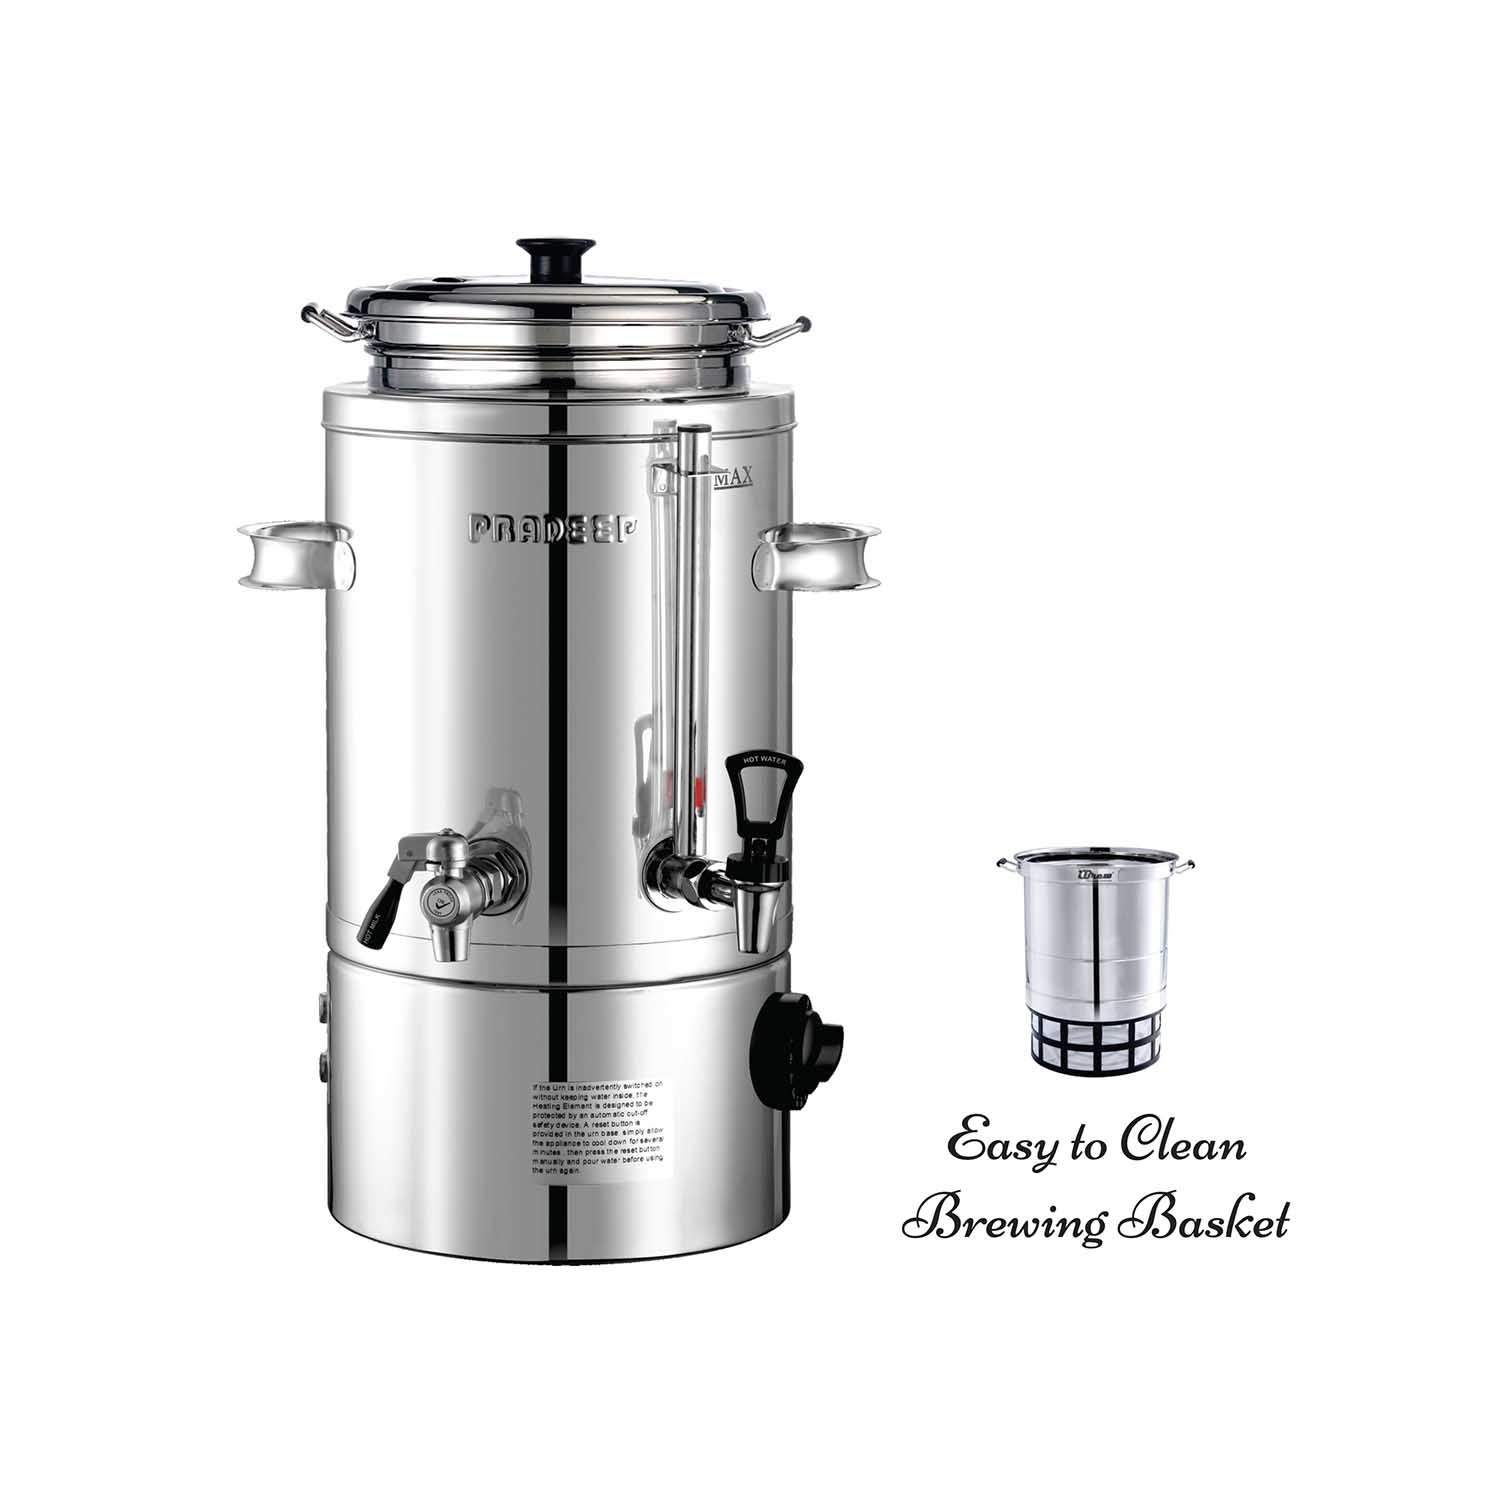 Pradeep Electric Catering Urn (Milk Boiler With Tea Mesh) - Stainless Steel - Silver